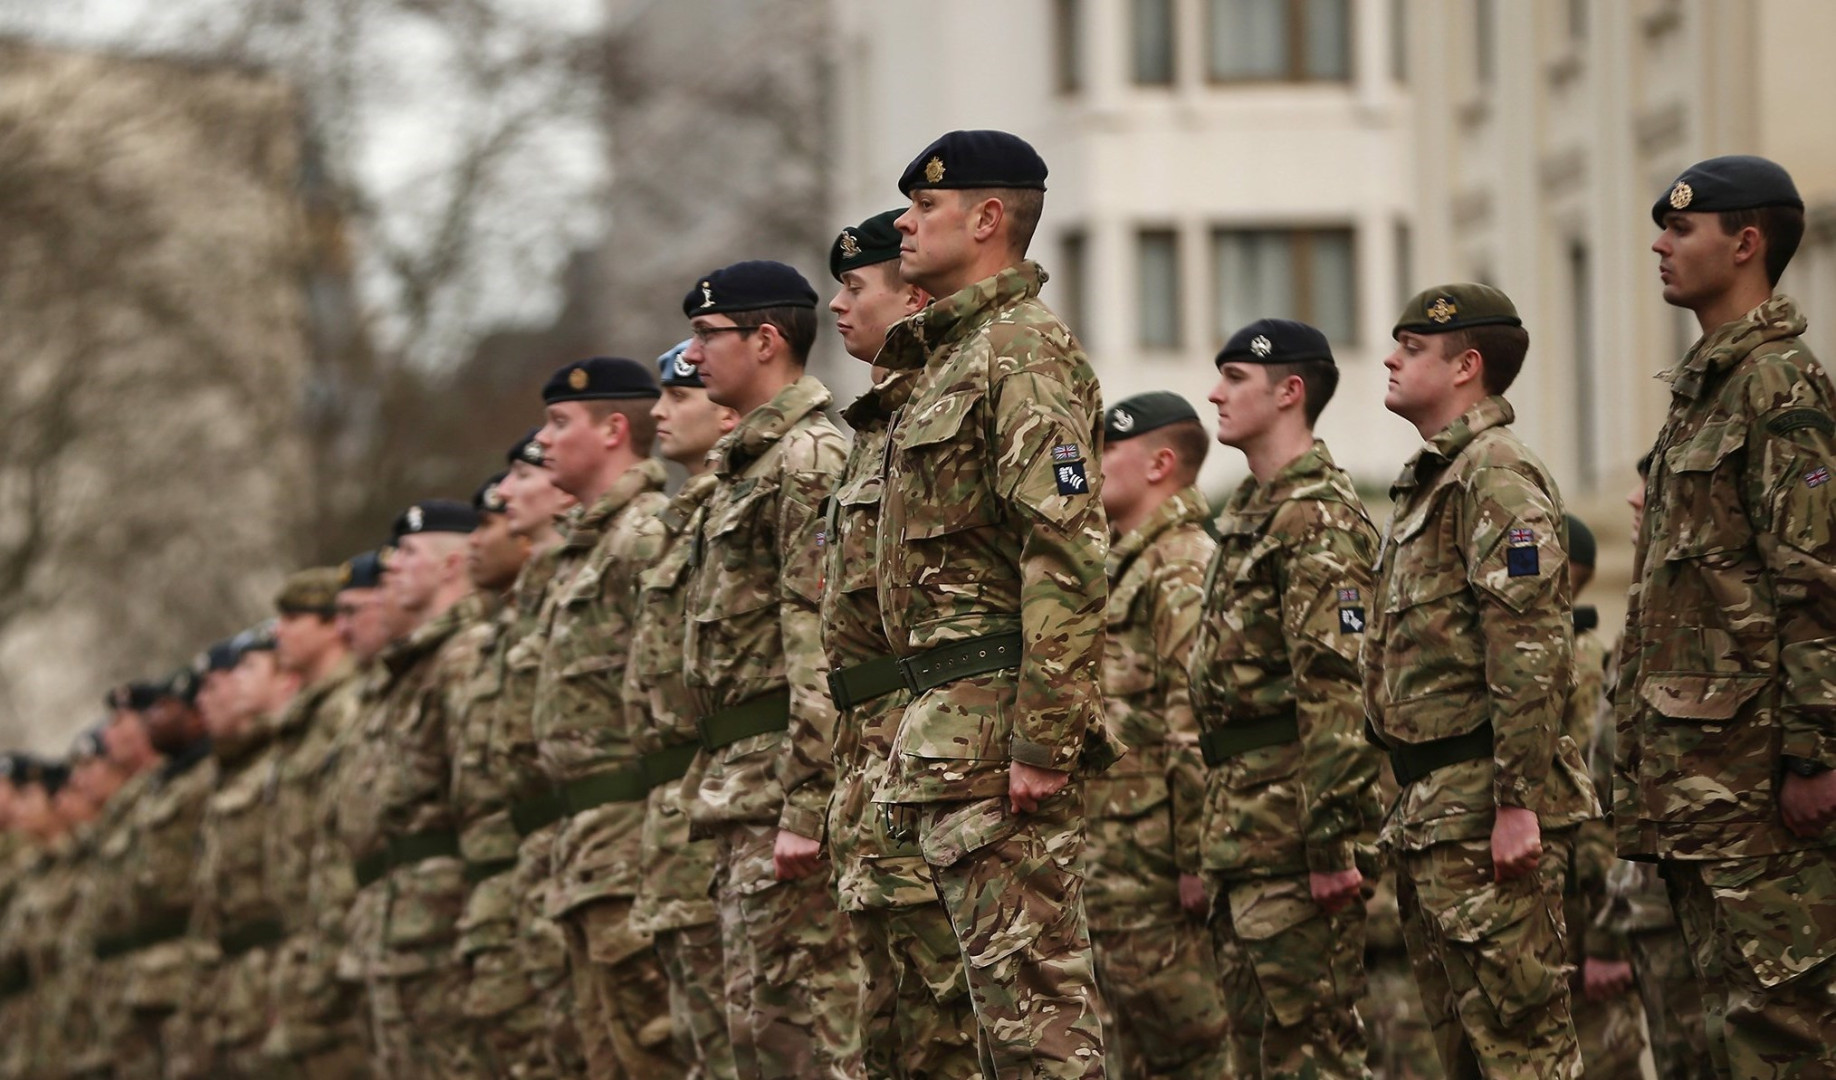 Britain to bolster "Hollowed Out" armed forces to counter global threats